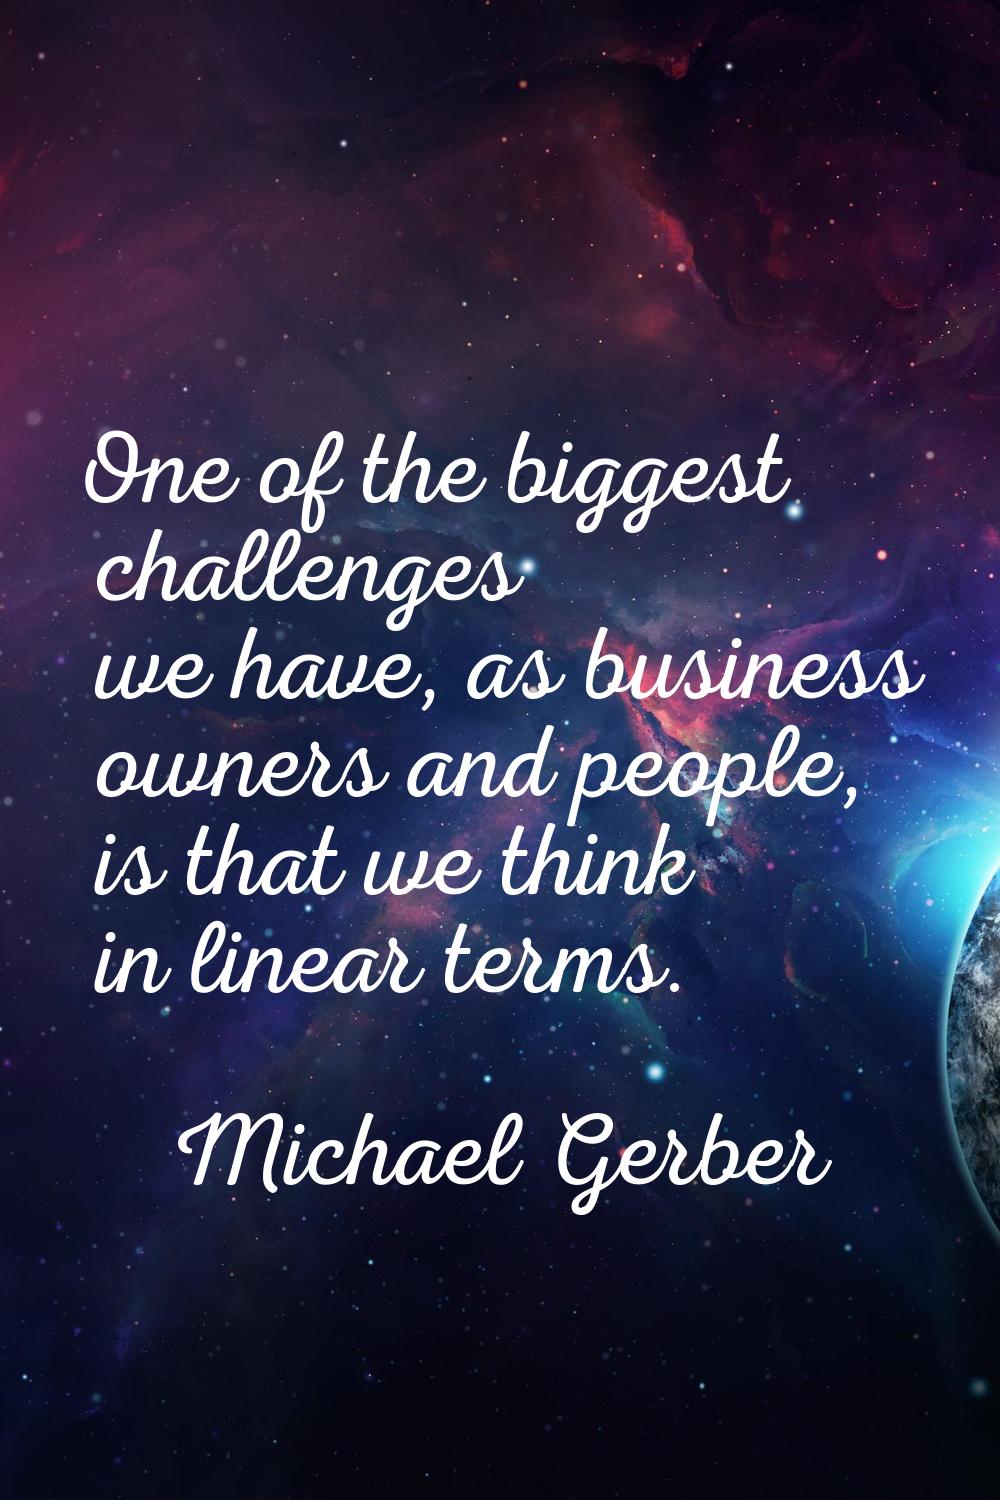 One of the biggest challenges we have, as business owners and people, is that we think in linear te